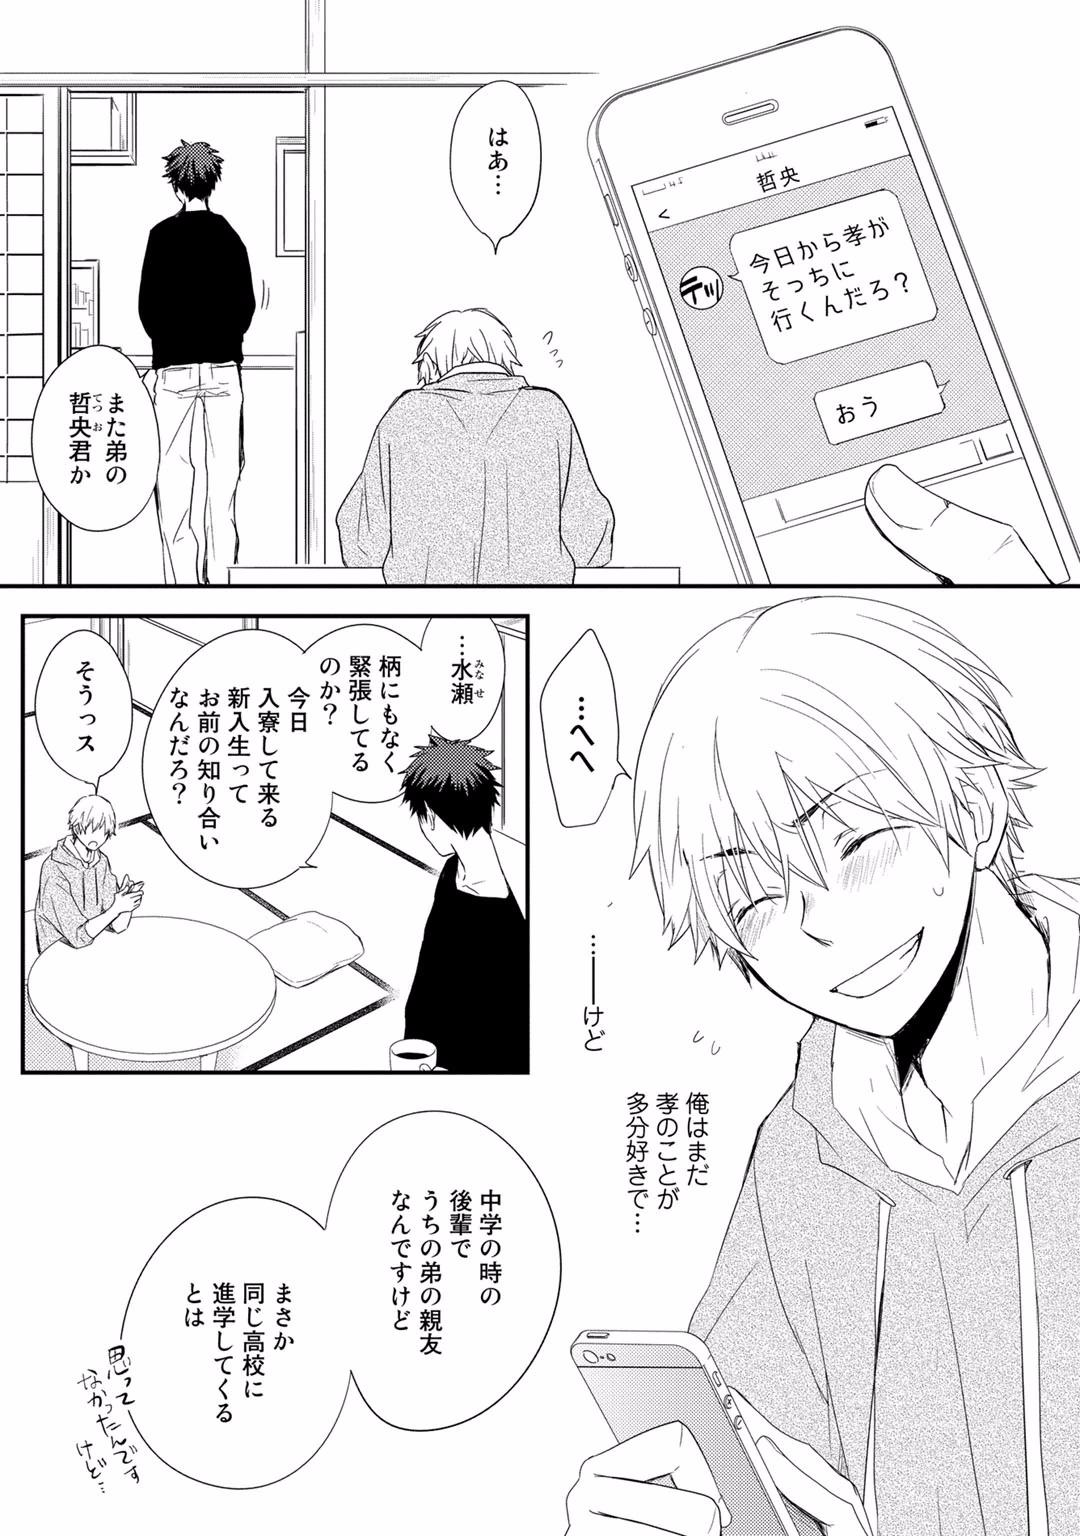 Facesitting Itsudemo Kimi ga - Anytime You're... Punished - Page 7